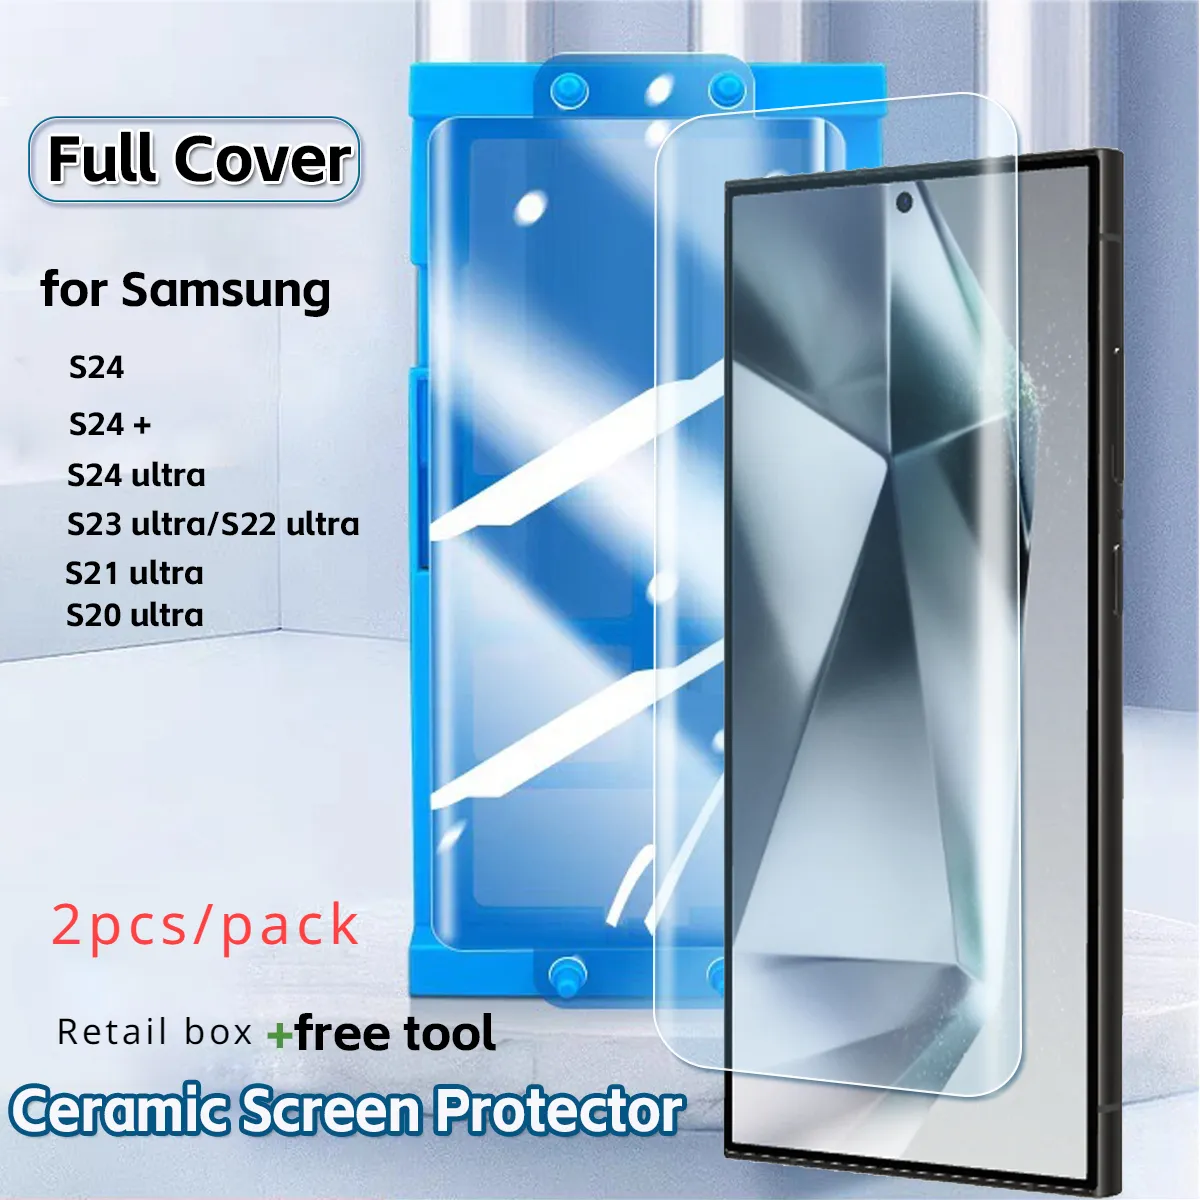 2pcs Ceramic Soft Film For Samsung Galaxy S24 S23 Ultra/Note 10 S24 Plus /Note 20 S22 S21 Ultra Curved Screen Protector with install tool kit +retail box